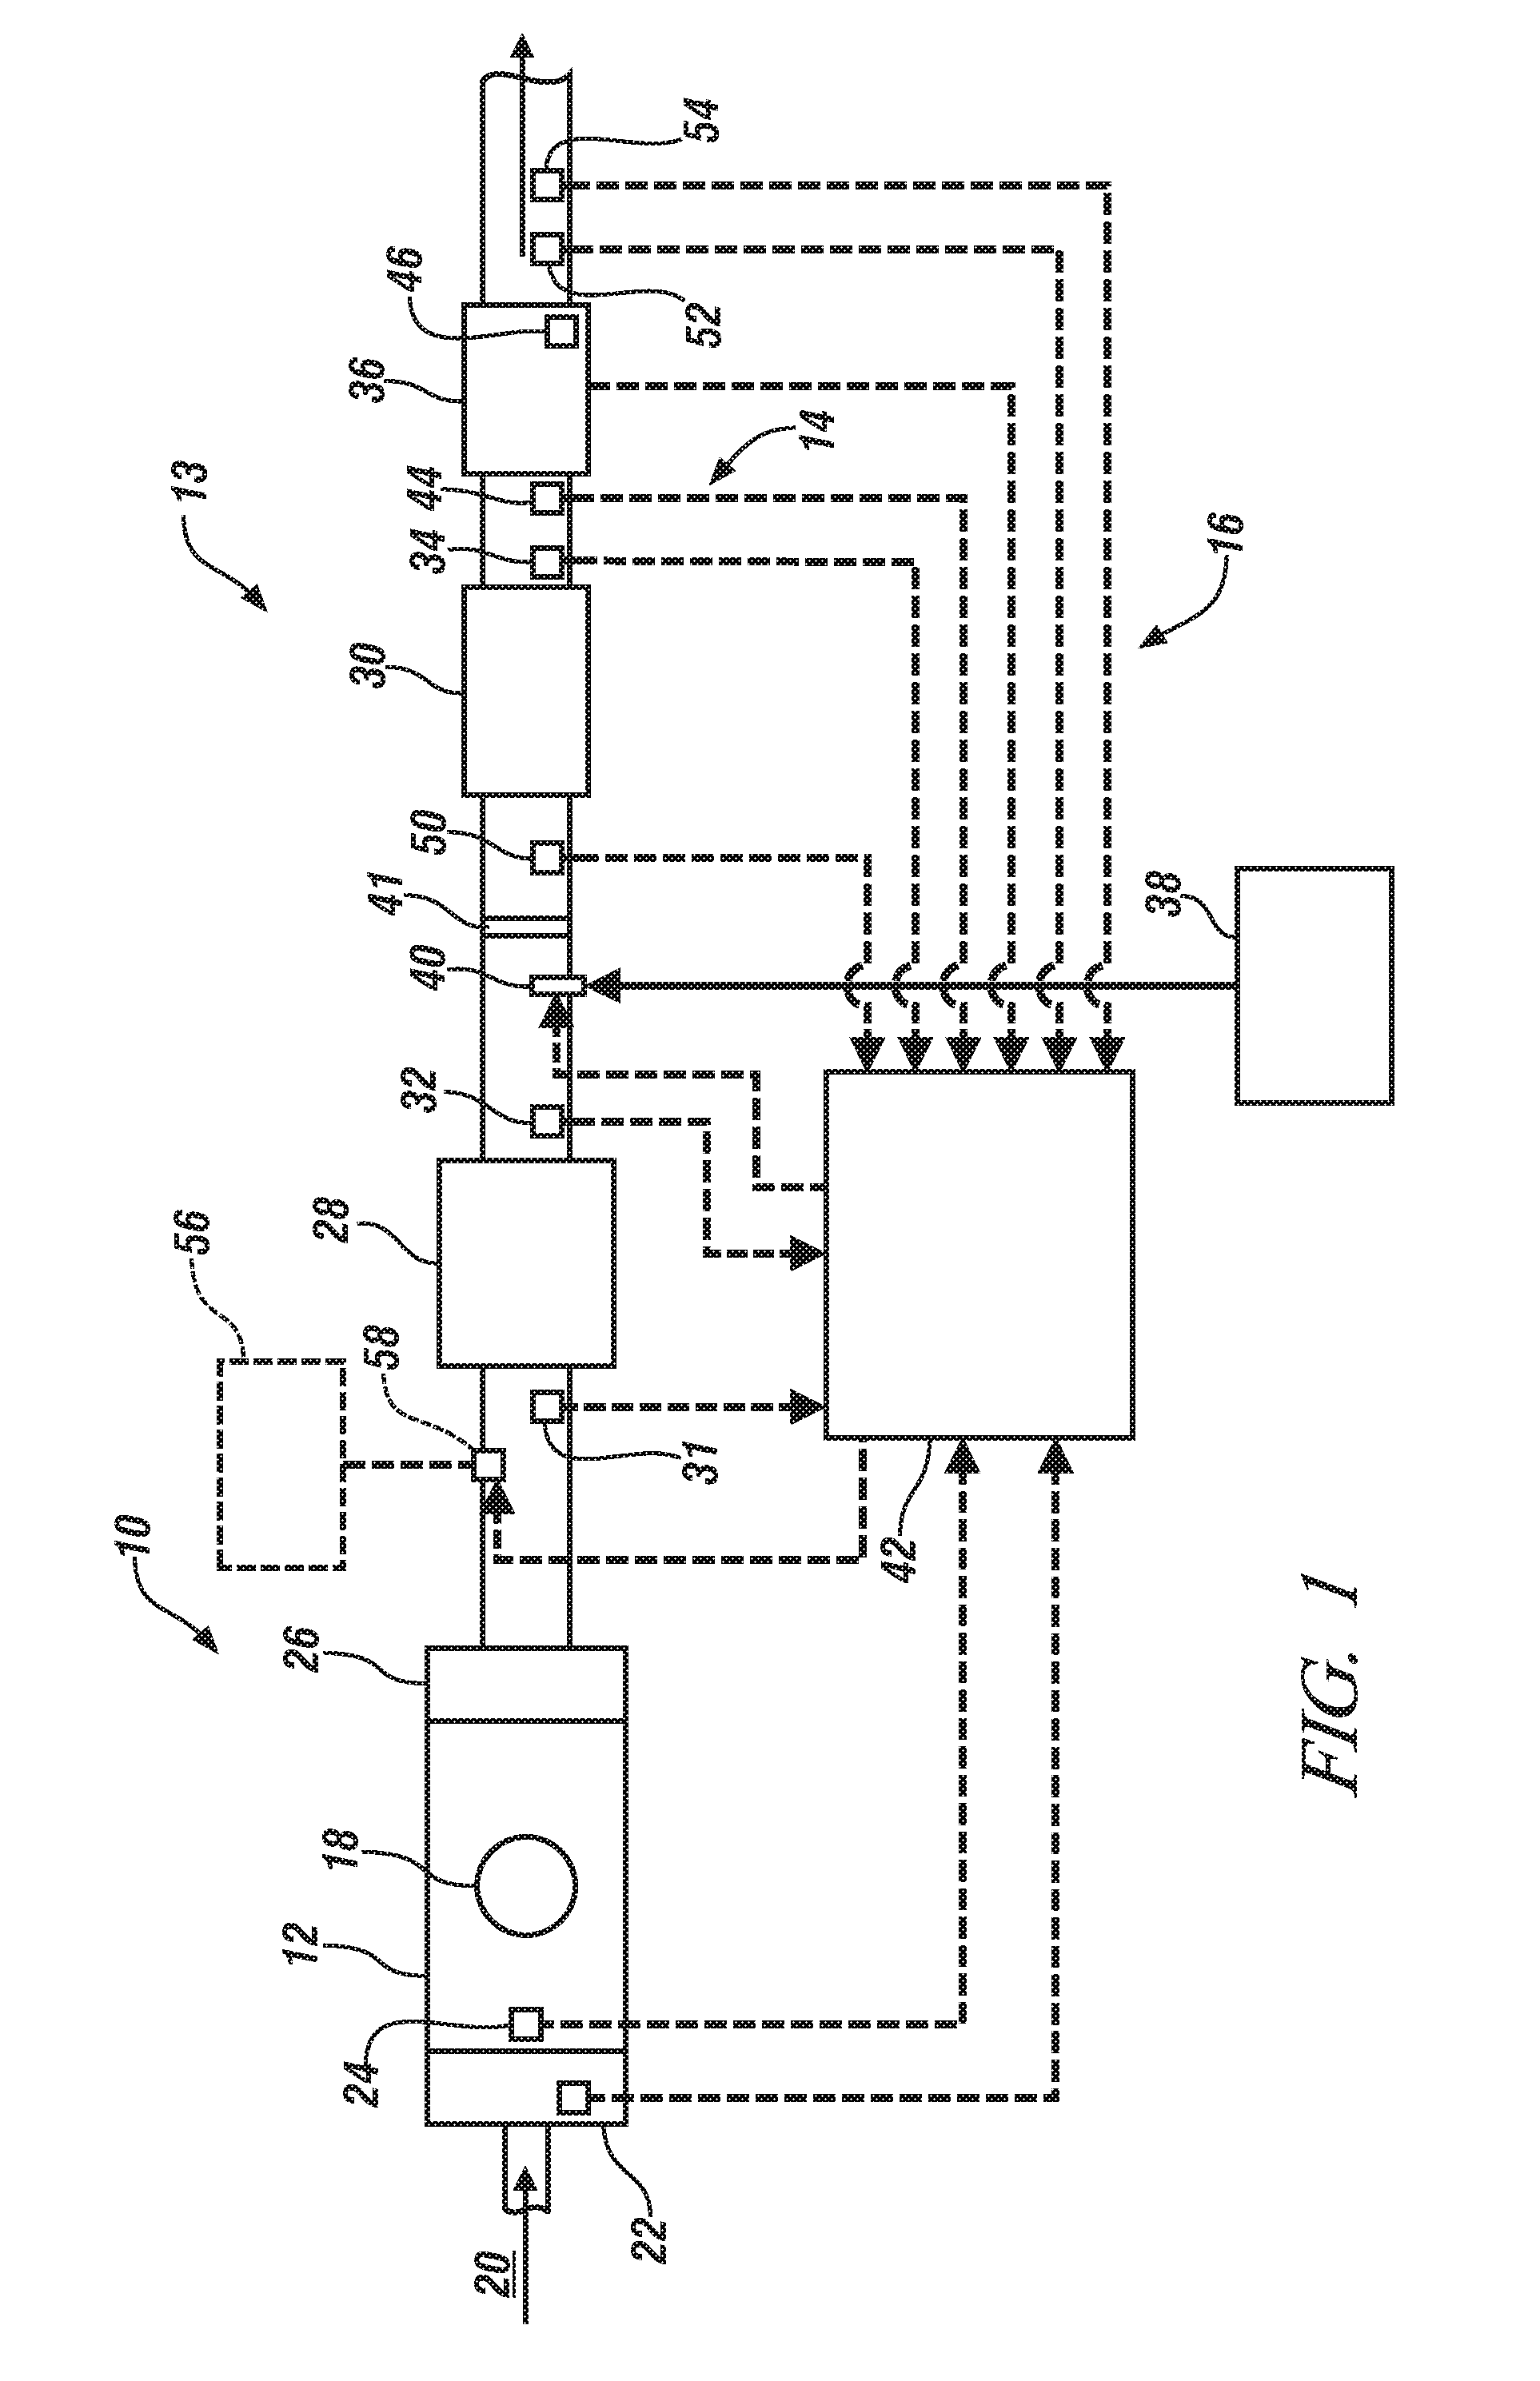 System and method for controlling an exhaust system having a selective catalyst reduction component